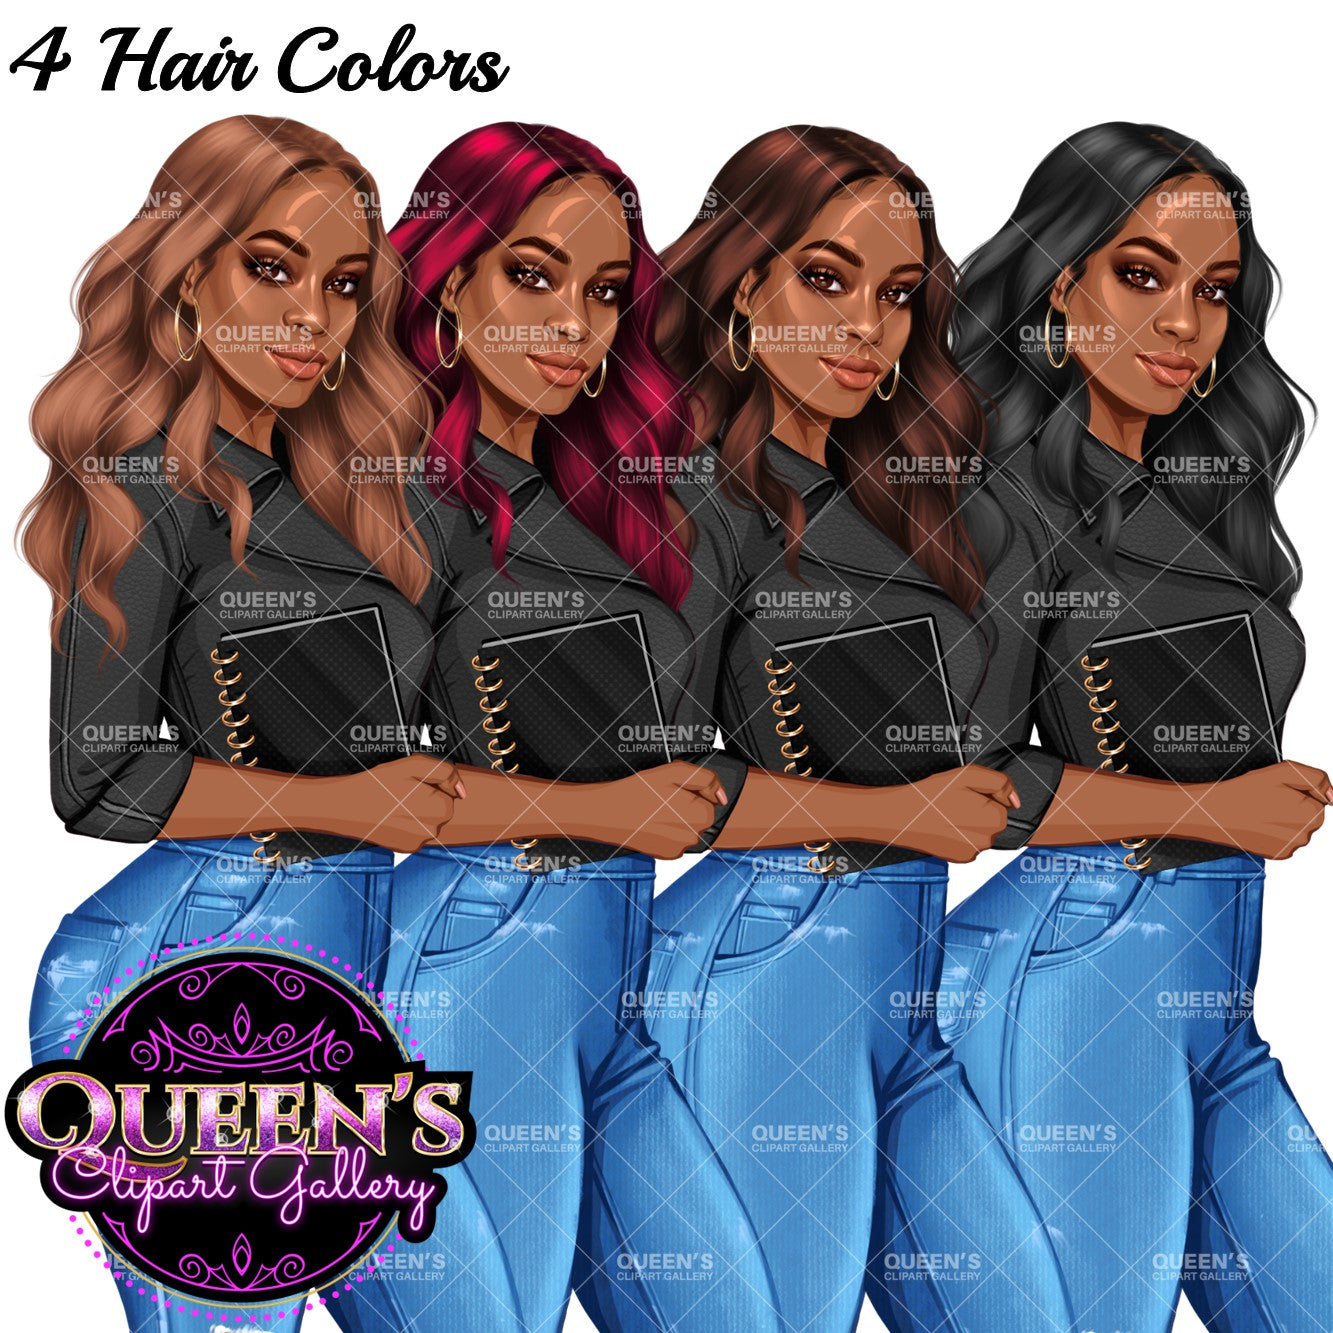 Planner girl clipart, Jeans girl clipart, Afro girl clipart, Fashion girl clipart, Denim jeans girl, Black girl magic African American woman